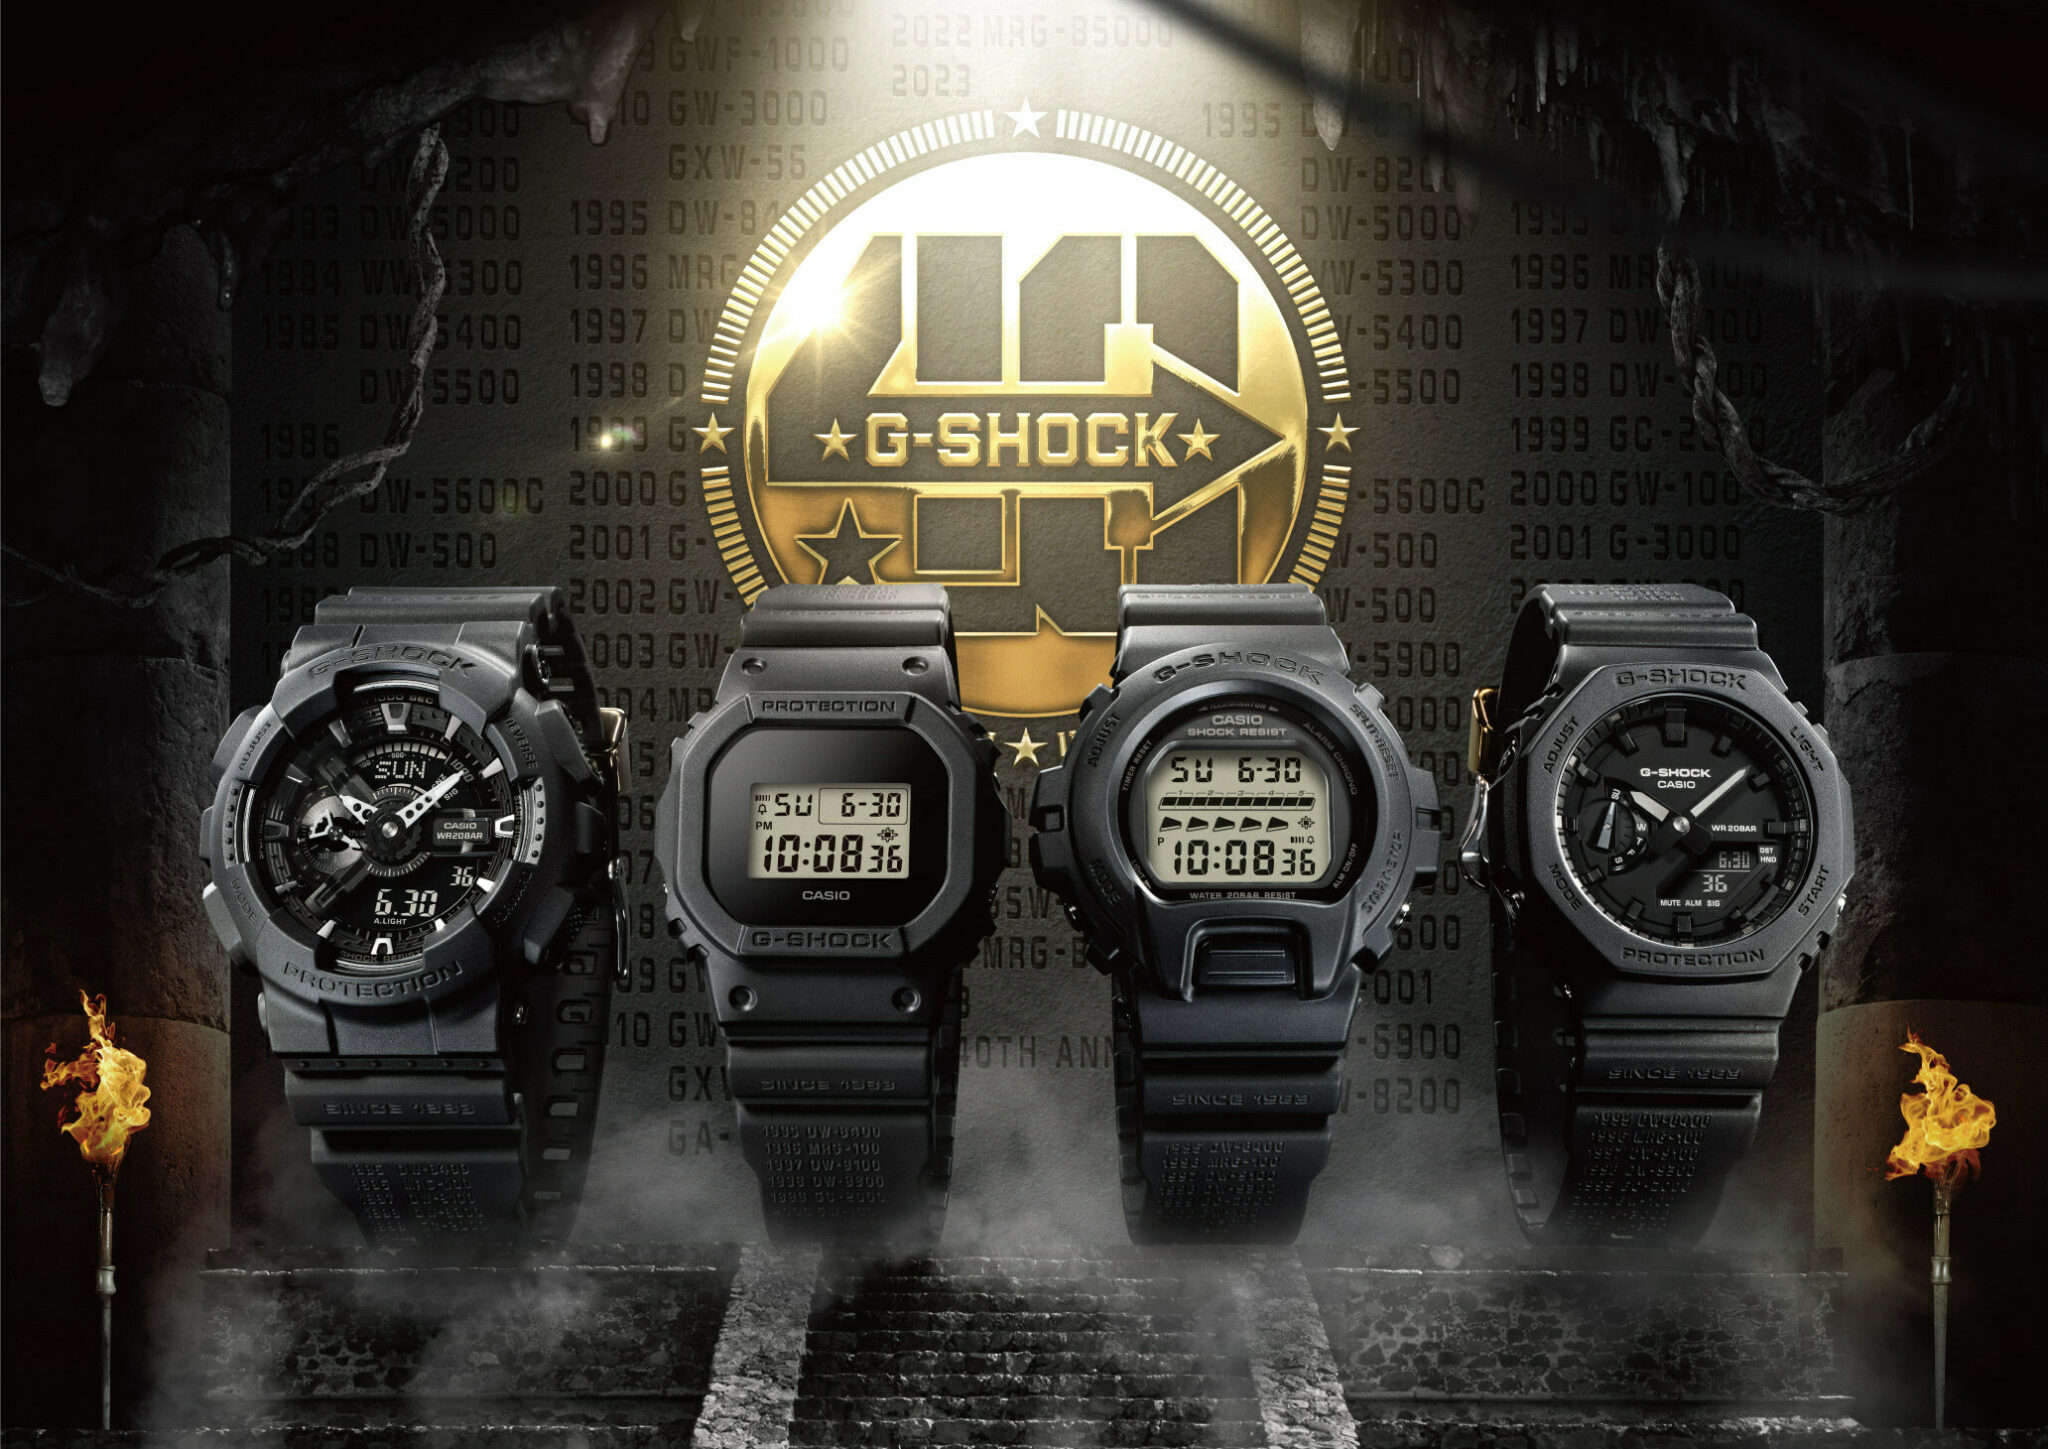 Casio Celebrates 40 Years Of G-SHOCK As It Reflects On Historic